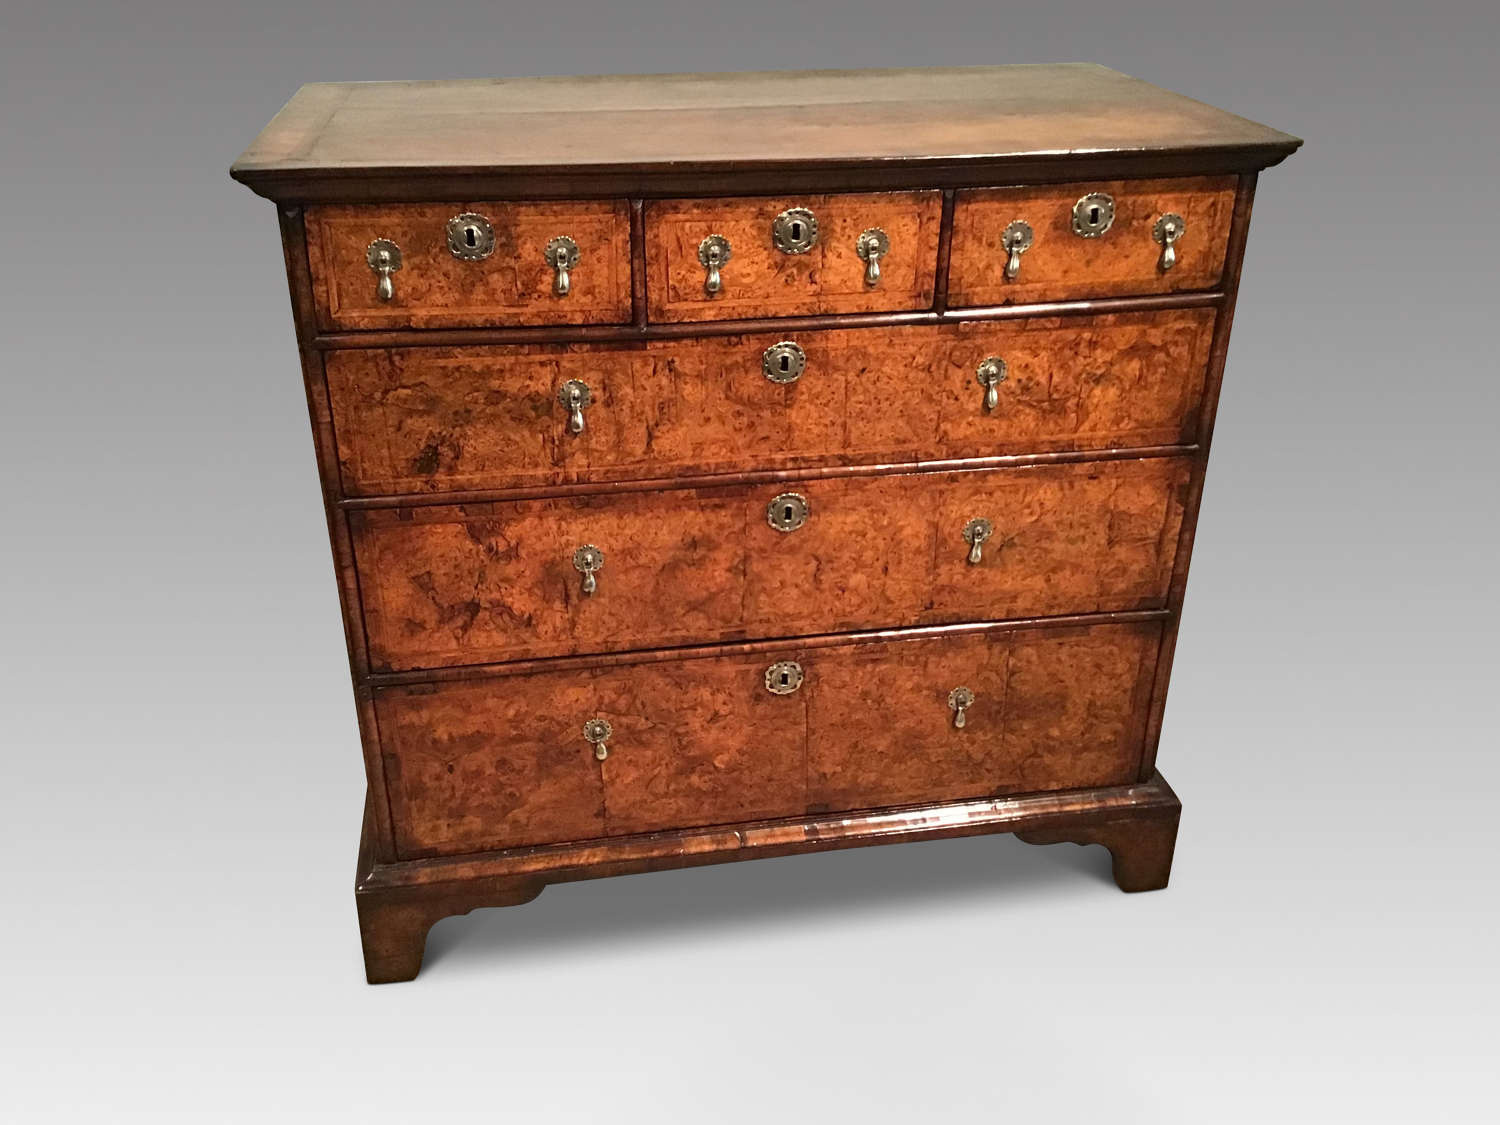 Queen Anne burr elm chest of drawers.